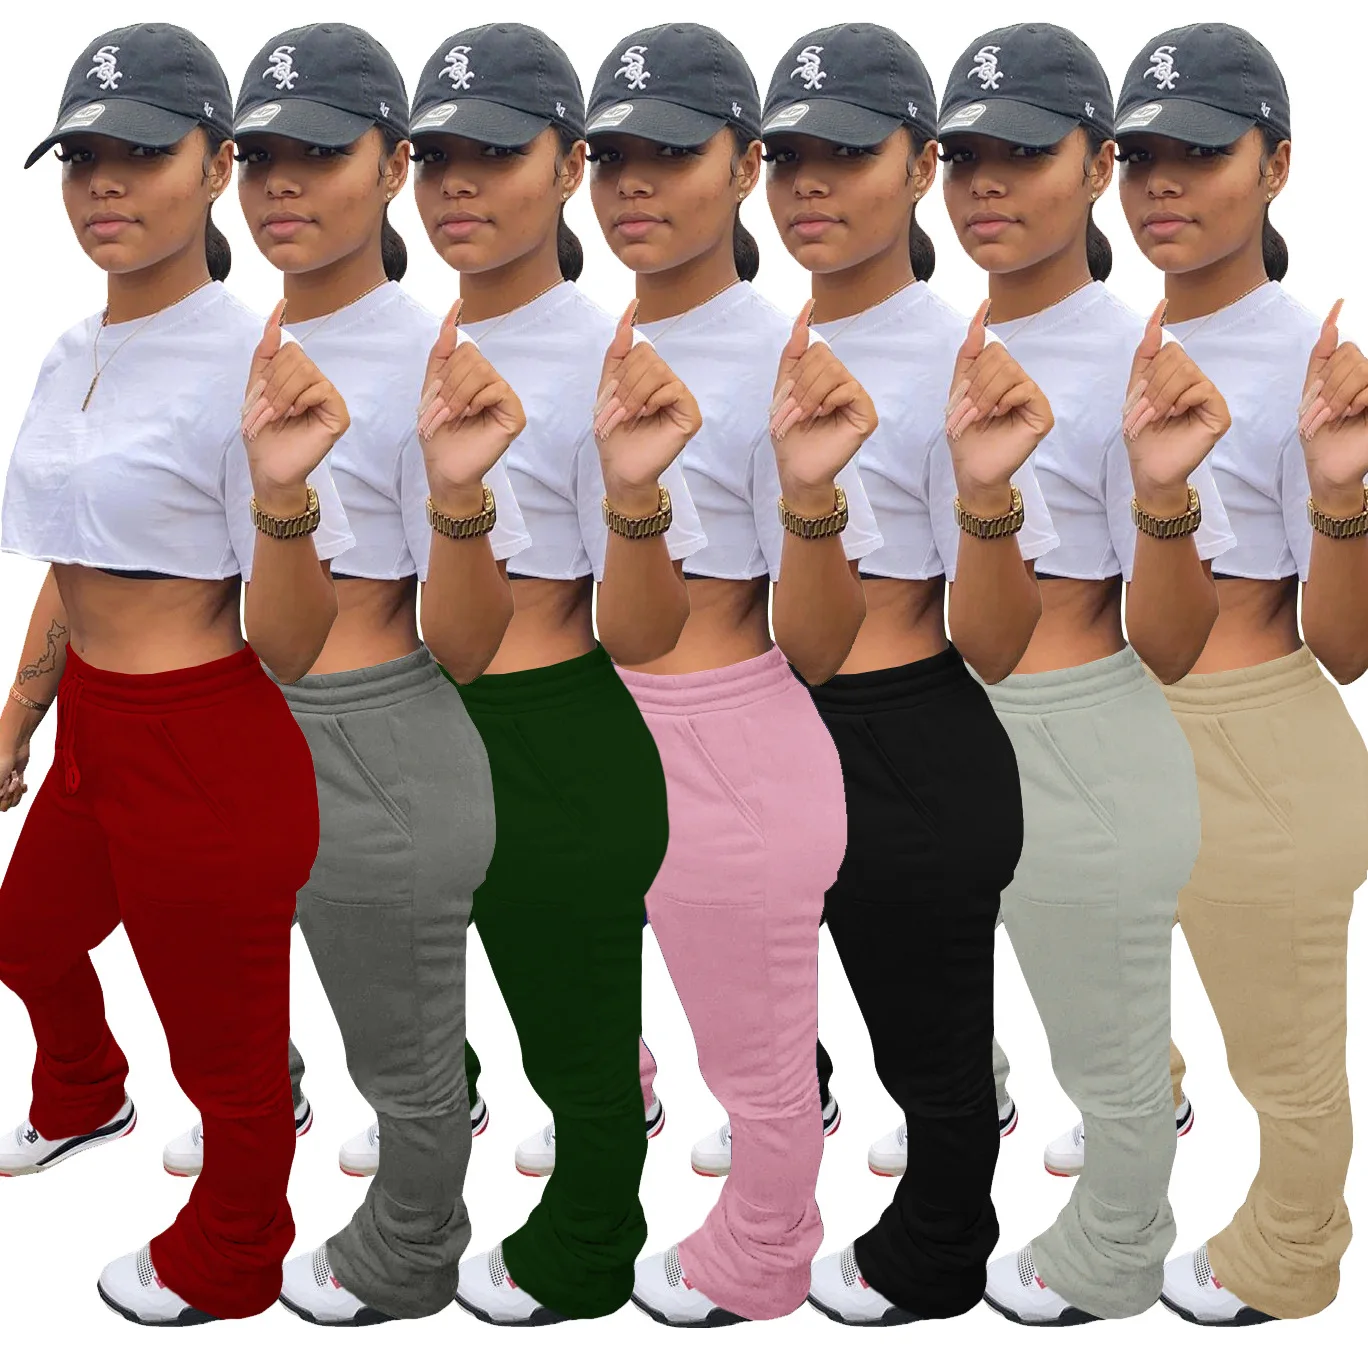 

Tracksuits Stacked Sweatpants For Women Patchwork Fashion Sporting Joggers Skinny Thick with Slit Women Stacked Pants, Green, gray, black, pink. blue, orange, khaki, white, dark gray